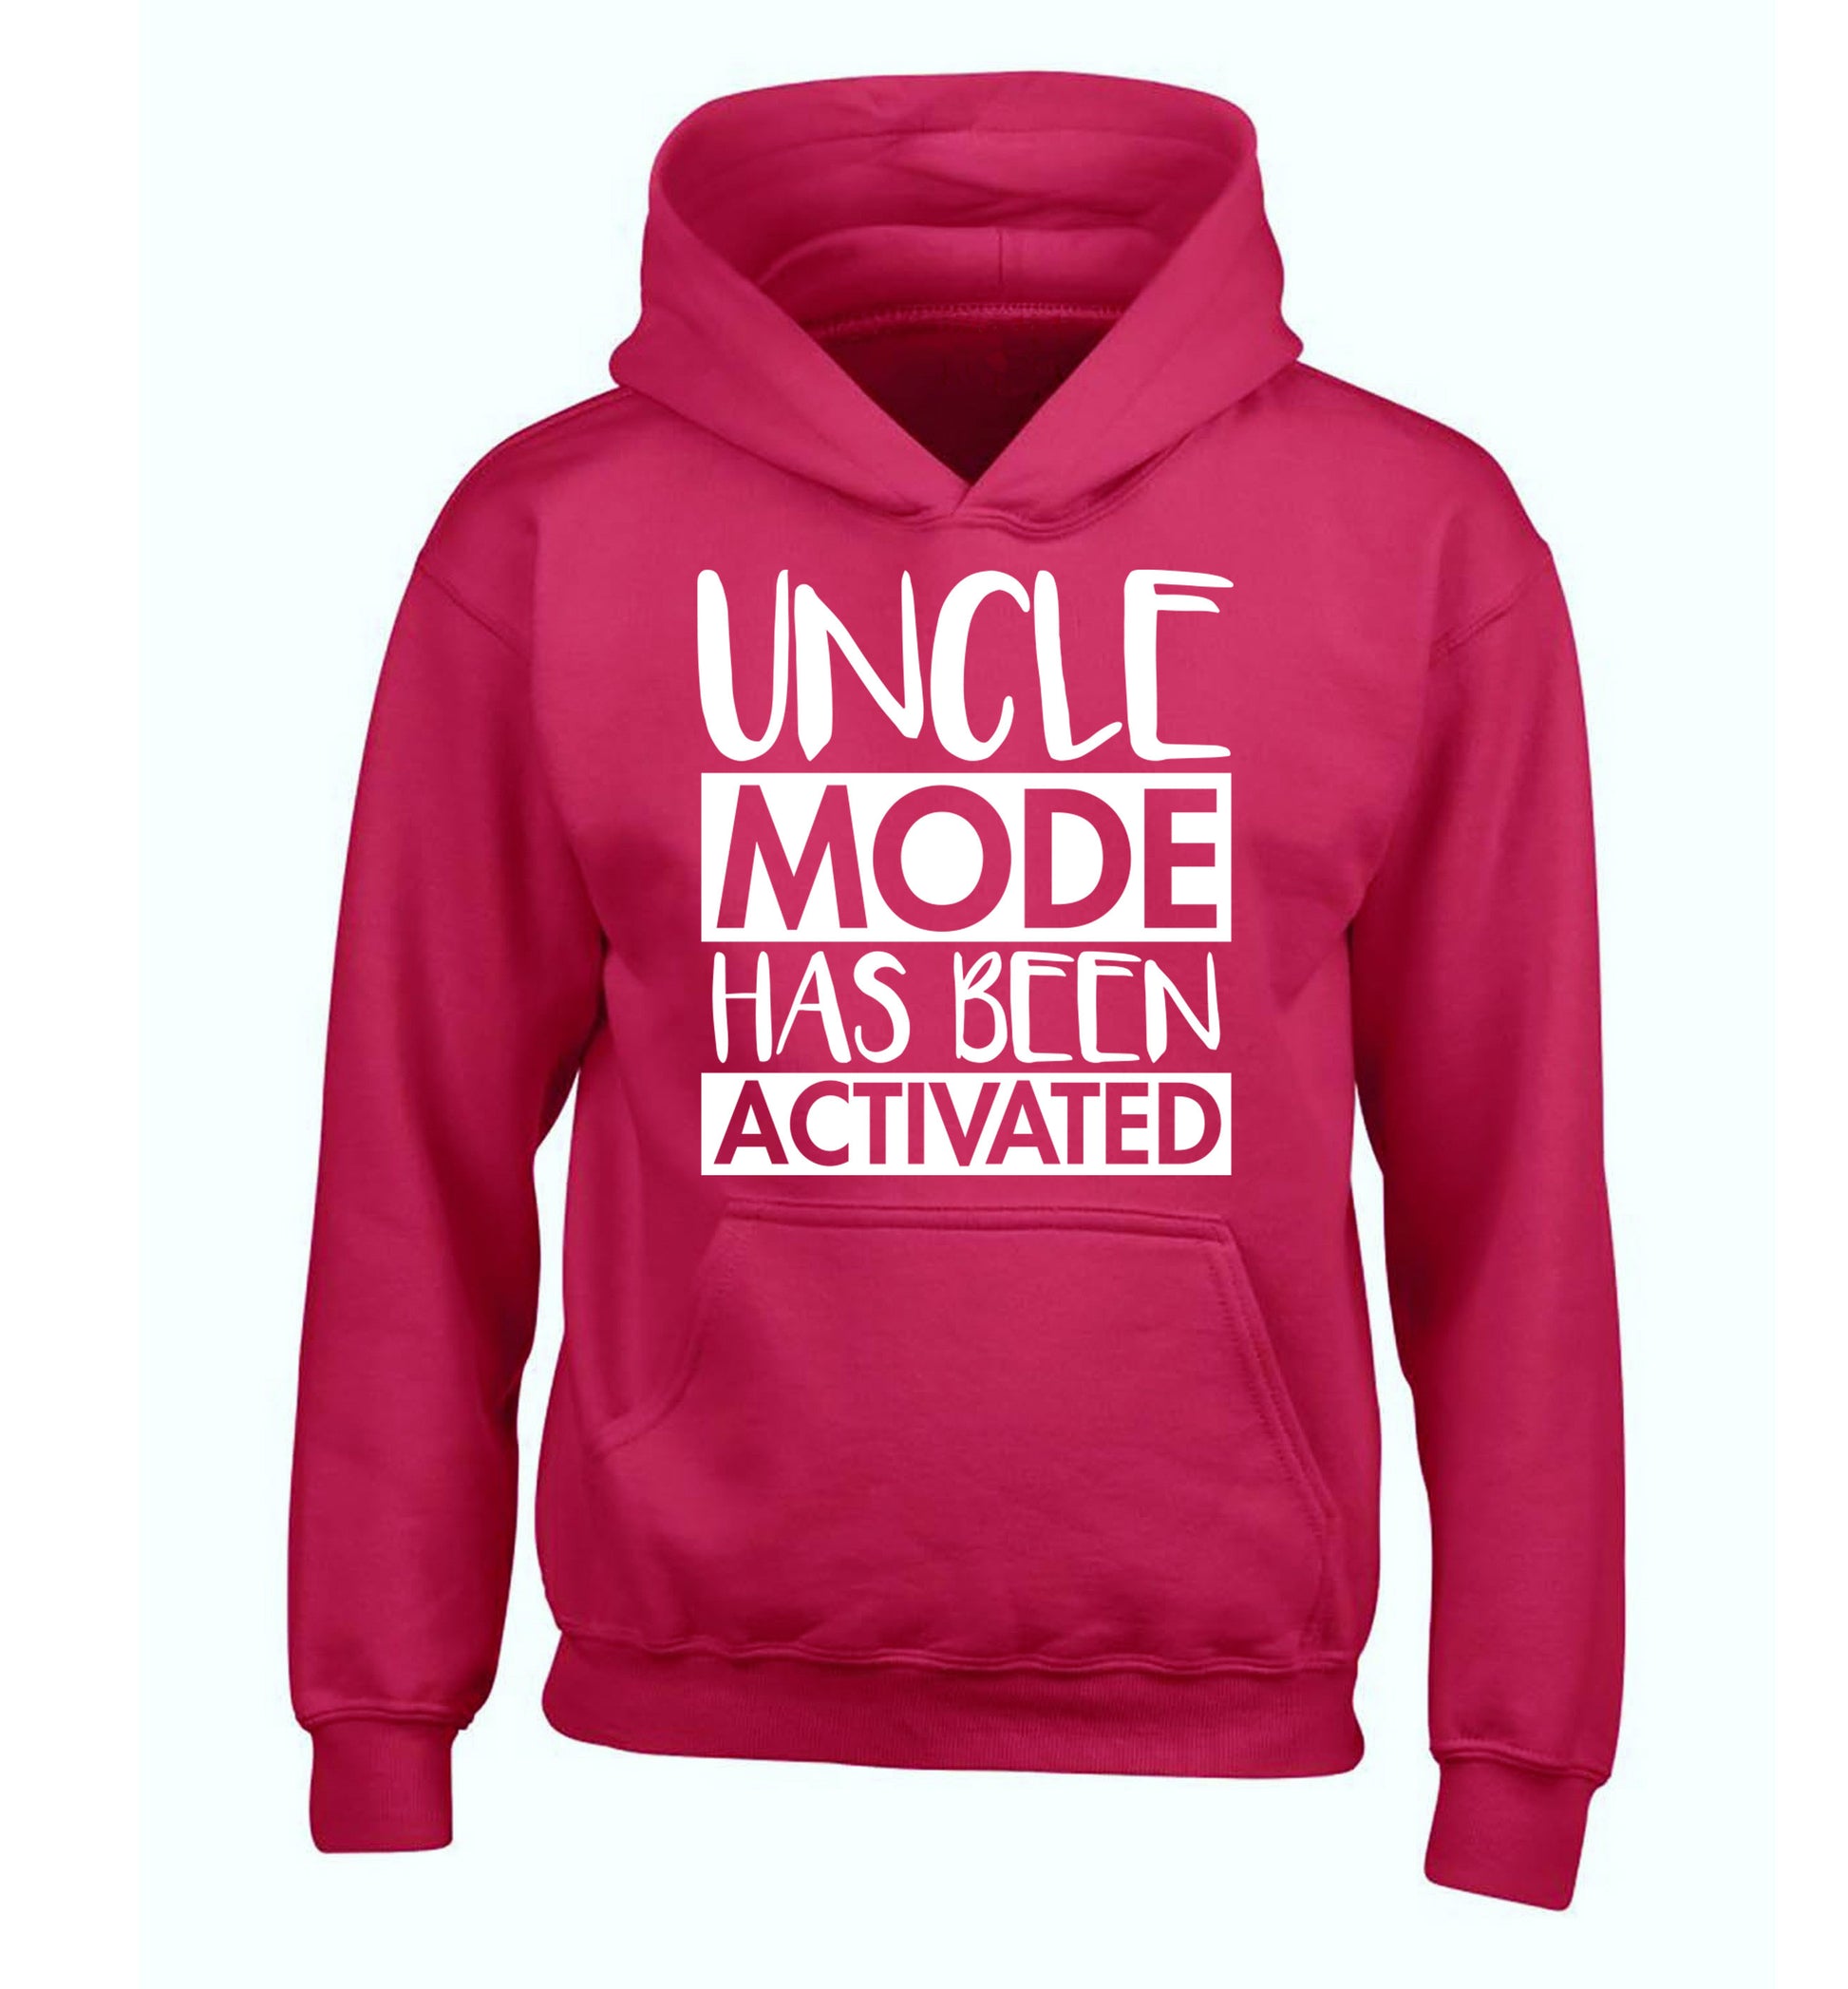 Uncle mode activated children's pink hoodie 12-14 Years